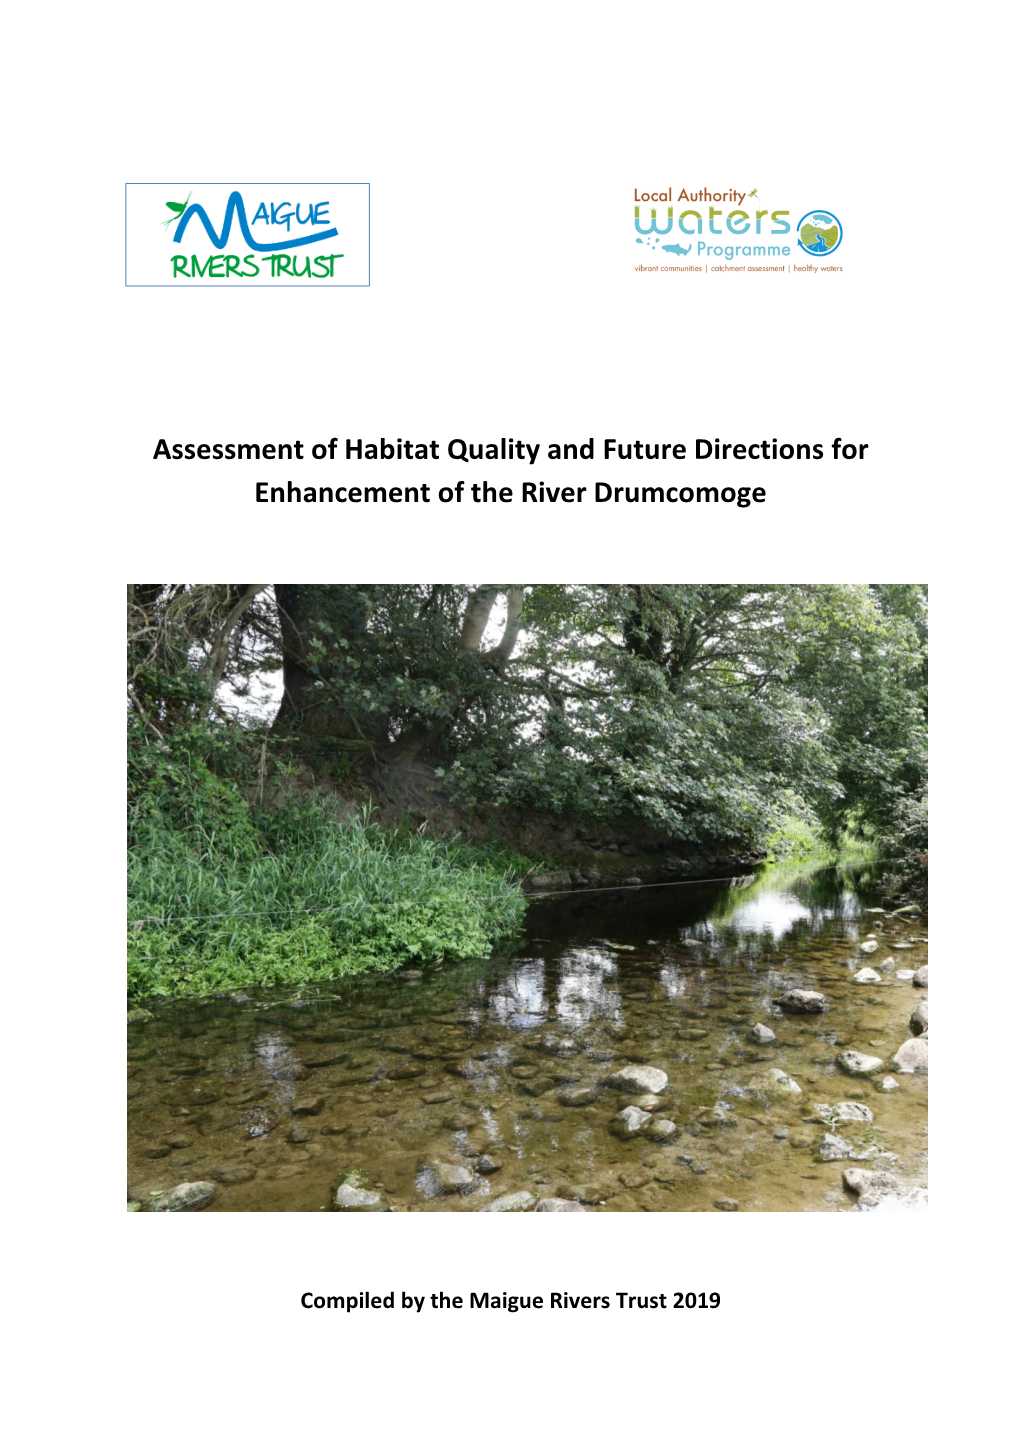 Assessment of Habitat Quality and Future Directions for Enhancement of the River Drumcomoge